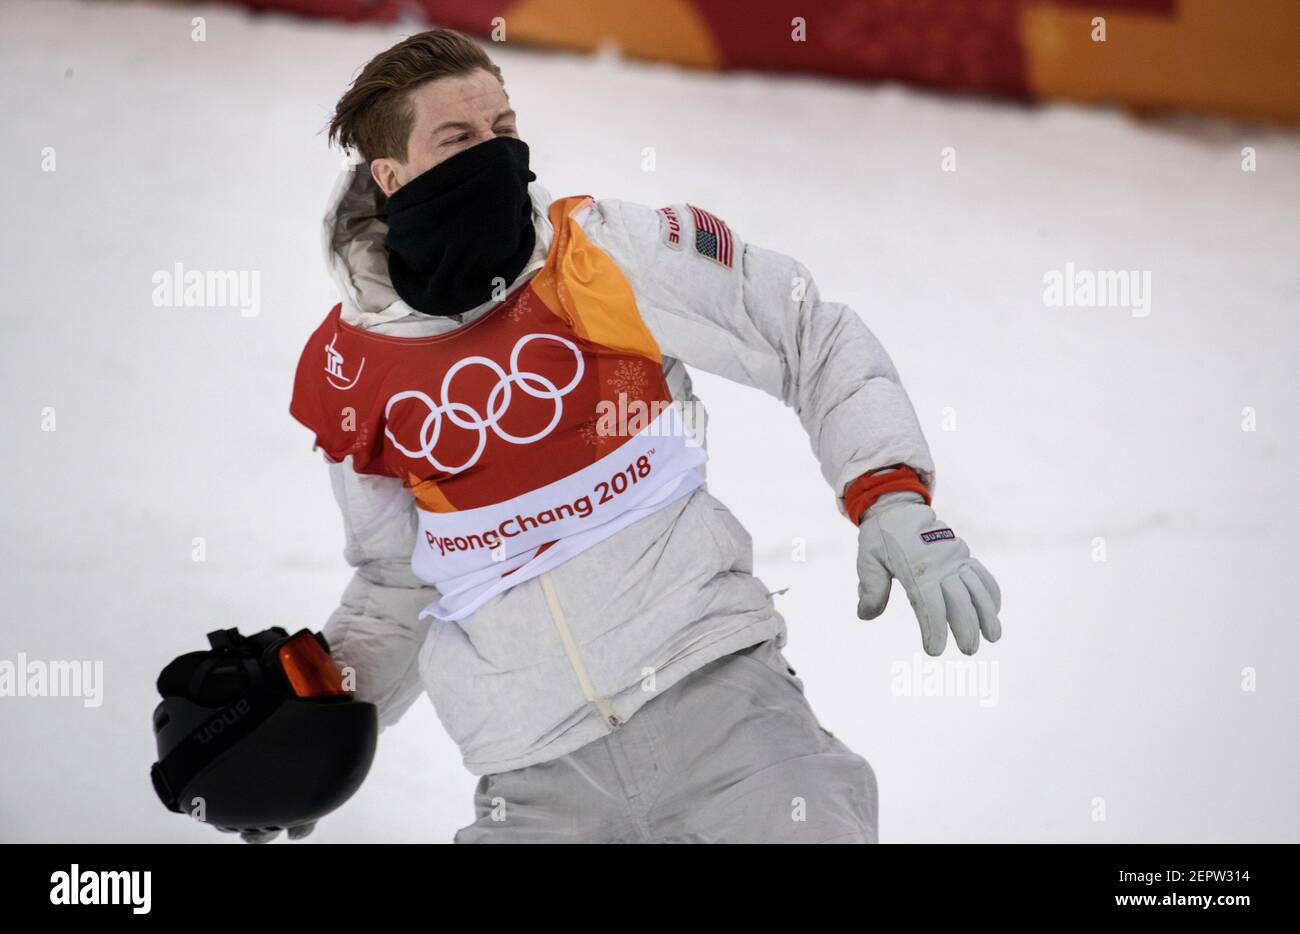 Shaun White of the USA during the Men's Half Pipe Snowboard finals at Phoenix Park in South Korea on Wednesday, Feb. 14, 2018, 2018, during the Pyeongchang Winter Olympics. (Photo by Carlos Gonzalez/Minneapolis Star Tribune/TNS/Sipa USA) Stock Photo